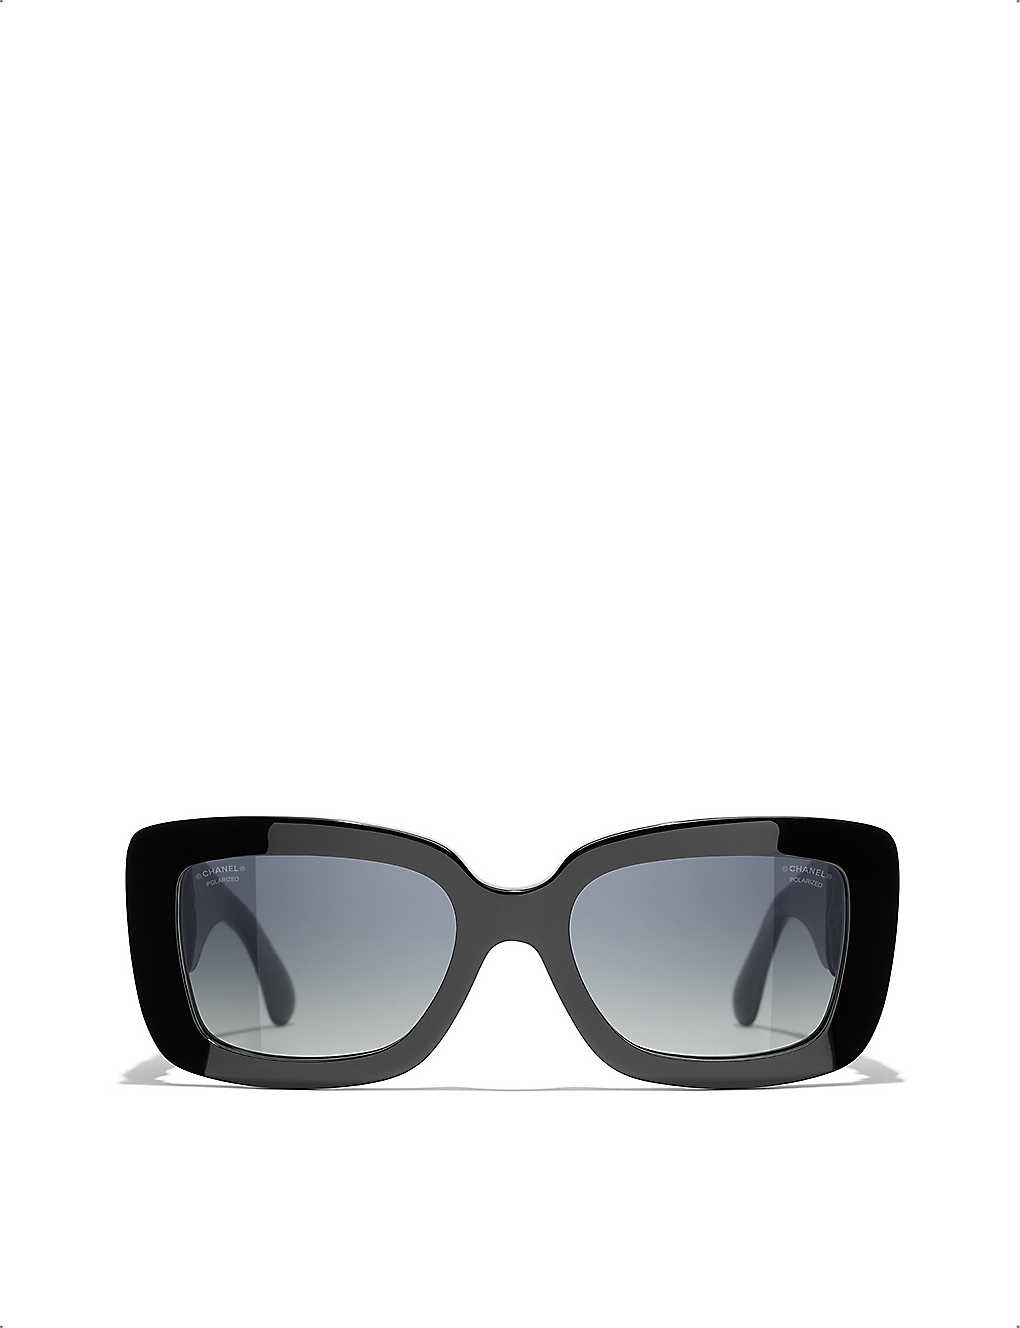 Chanel sunglasses with gray and black square frames and